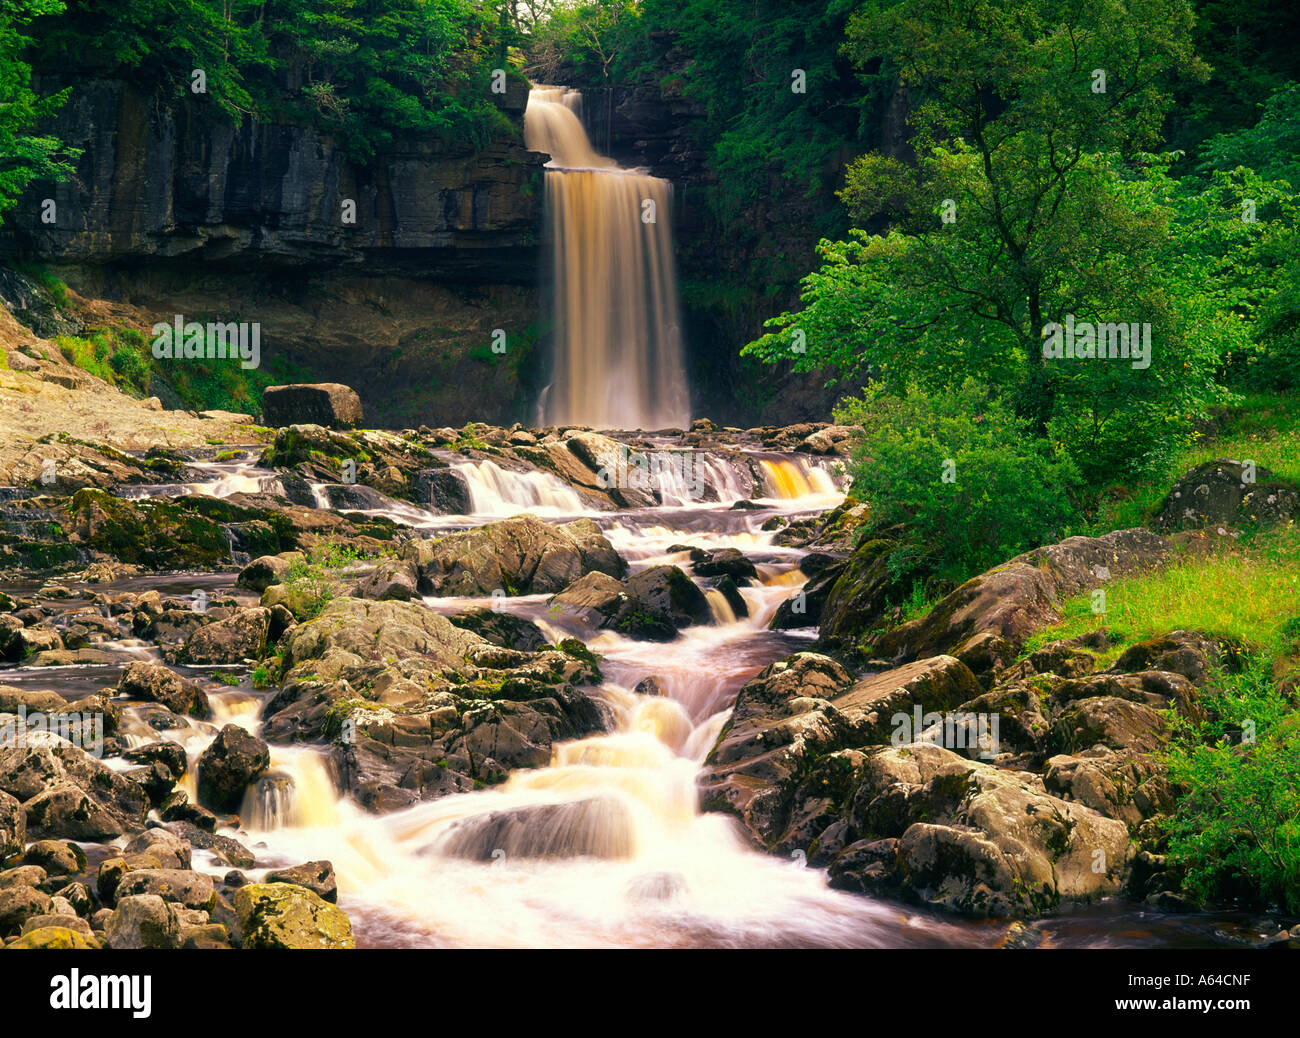 Thornton force waterfall in the Yorkshire Dales Stock Photo